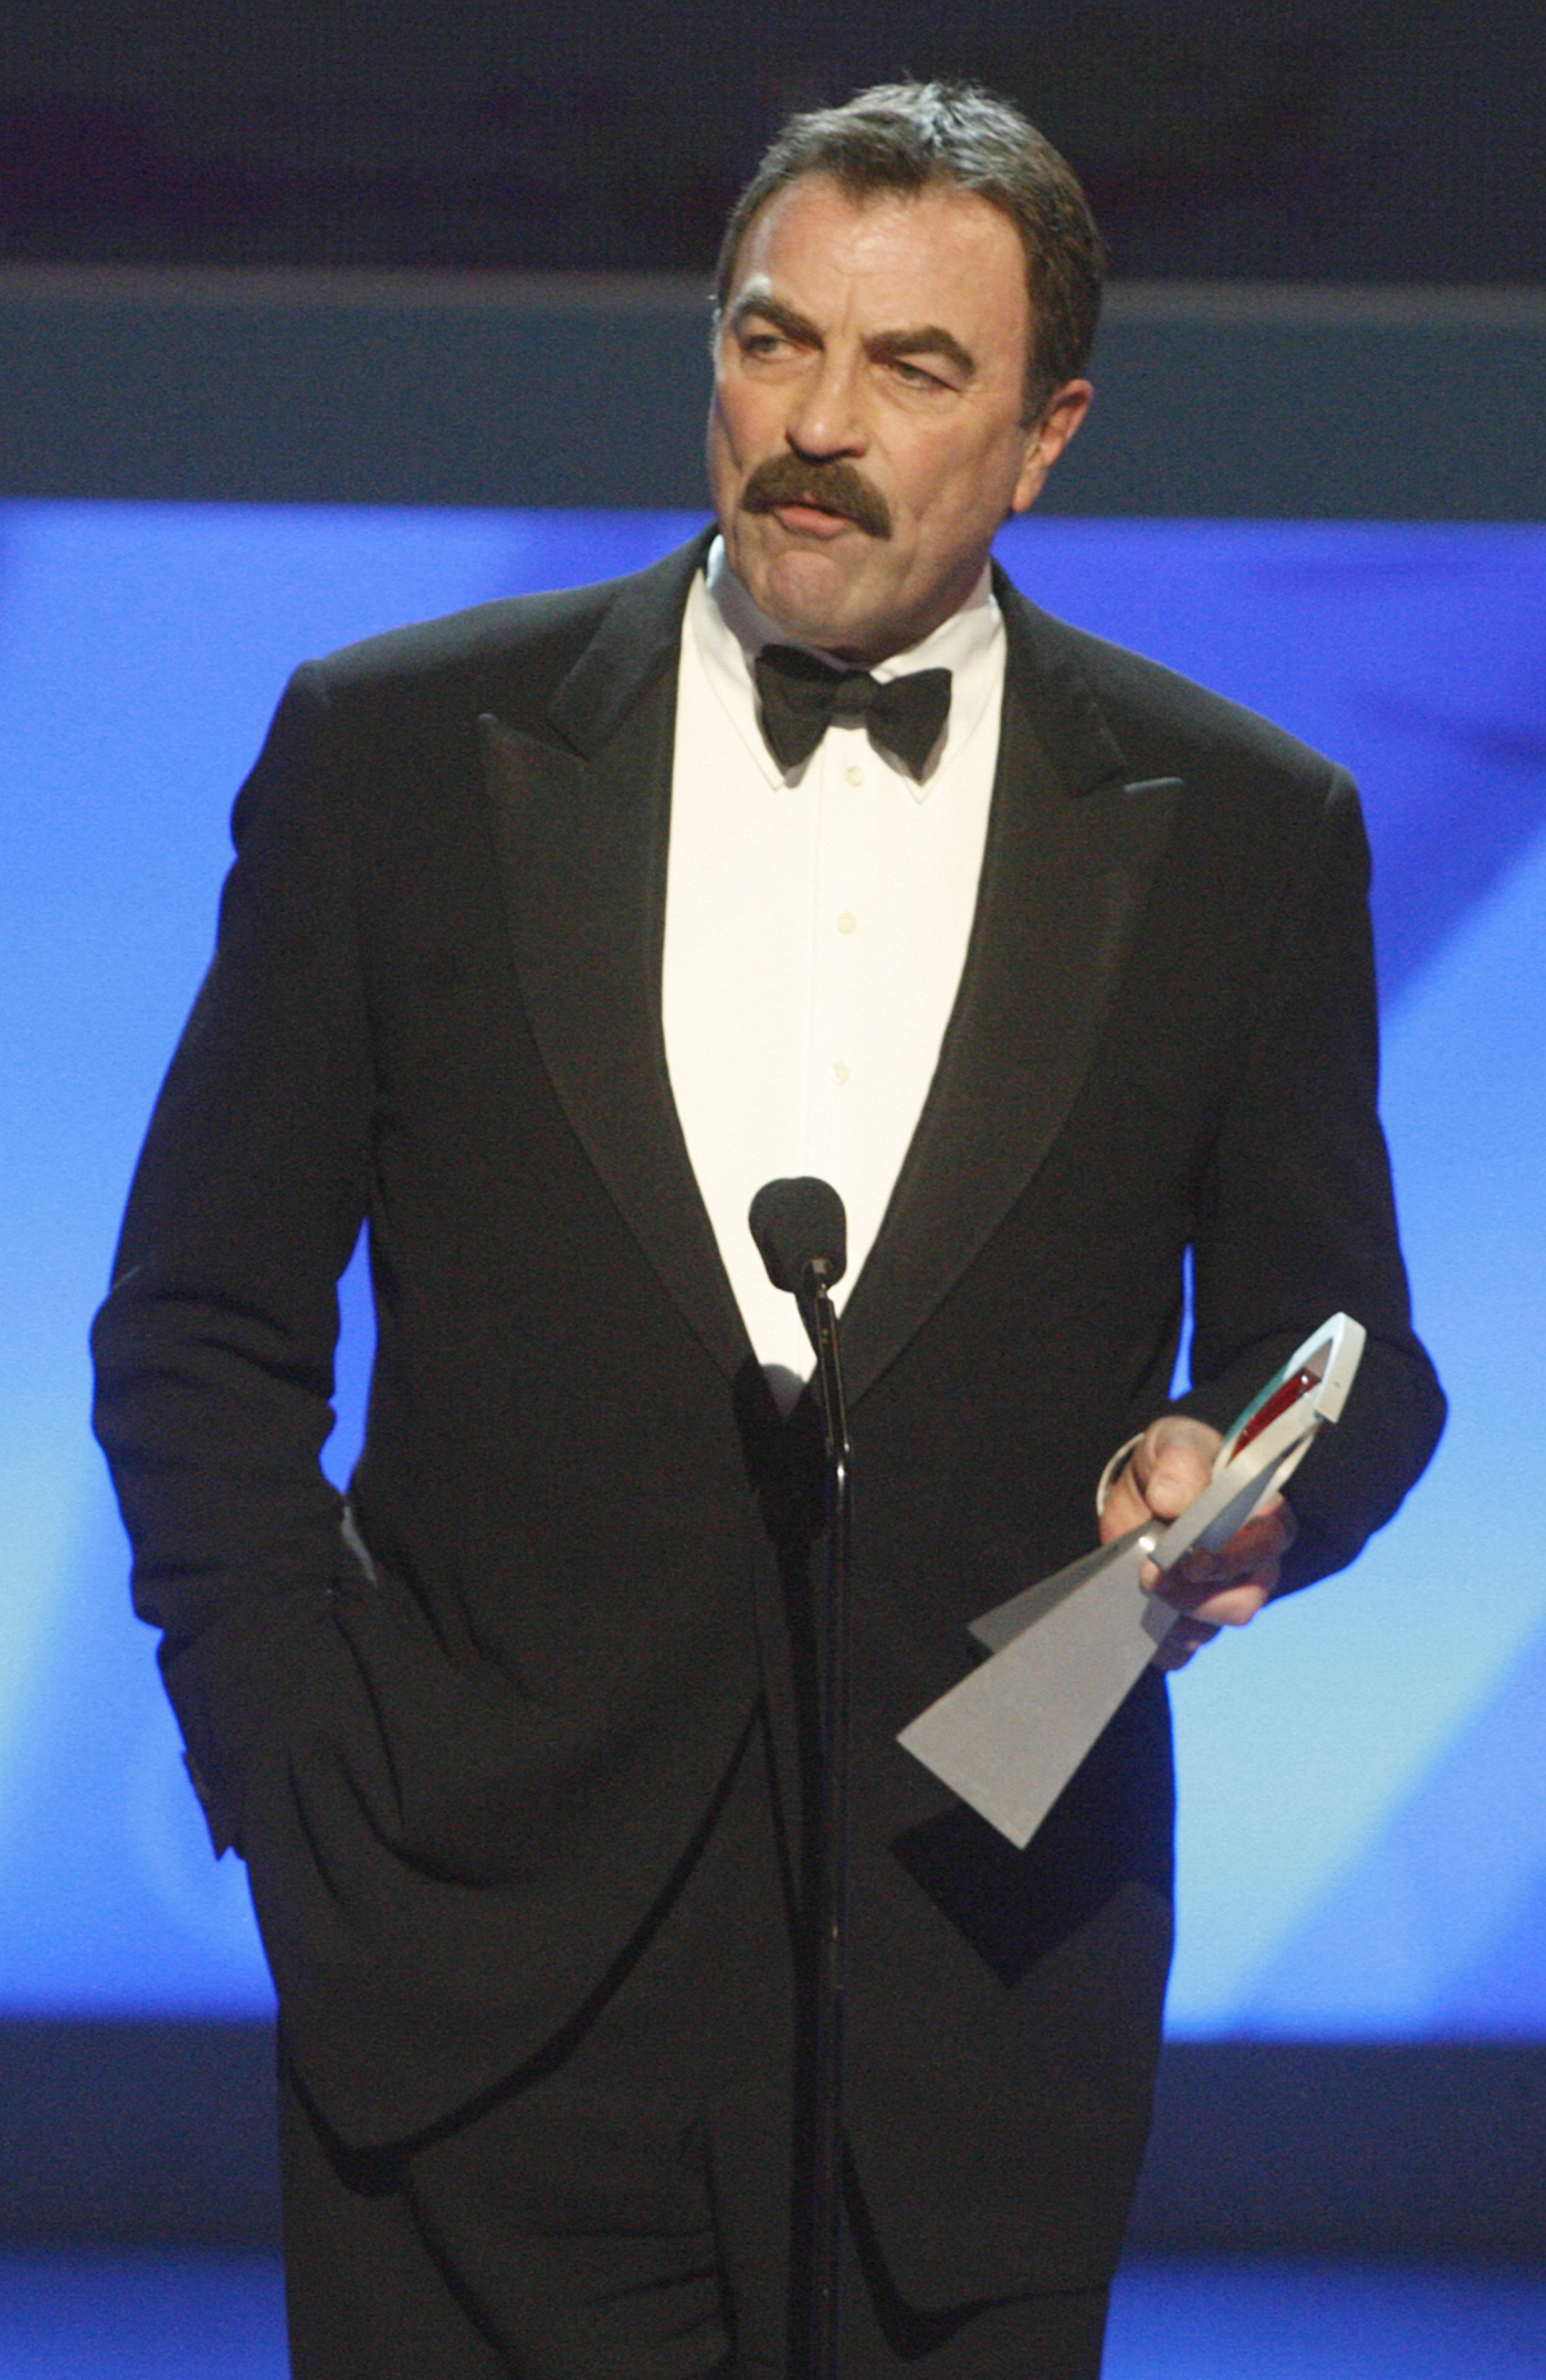 Cast member of "Magnum PI" (L-R) Tom Selleck accepts the Hero award from actor Matthew McConaughey at the taping of the 7th annual TV Land Awards in Los Angeles, California April 19, 2009. The awards show honors classic TV shows and will be telecast April 26 on the TV Land cable channel. REUTERS/Fred Prouser (UNITED STATES ENTERTAINMENT)